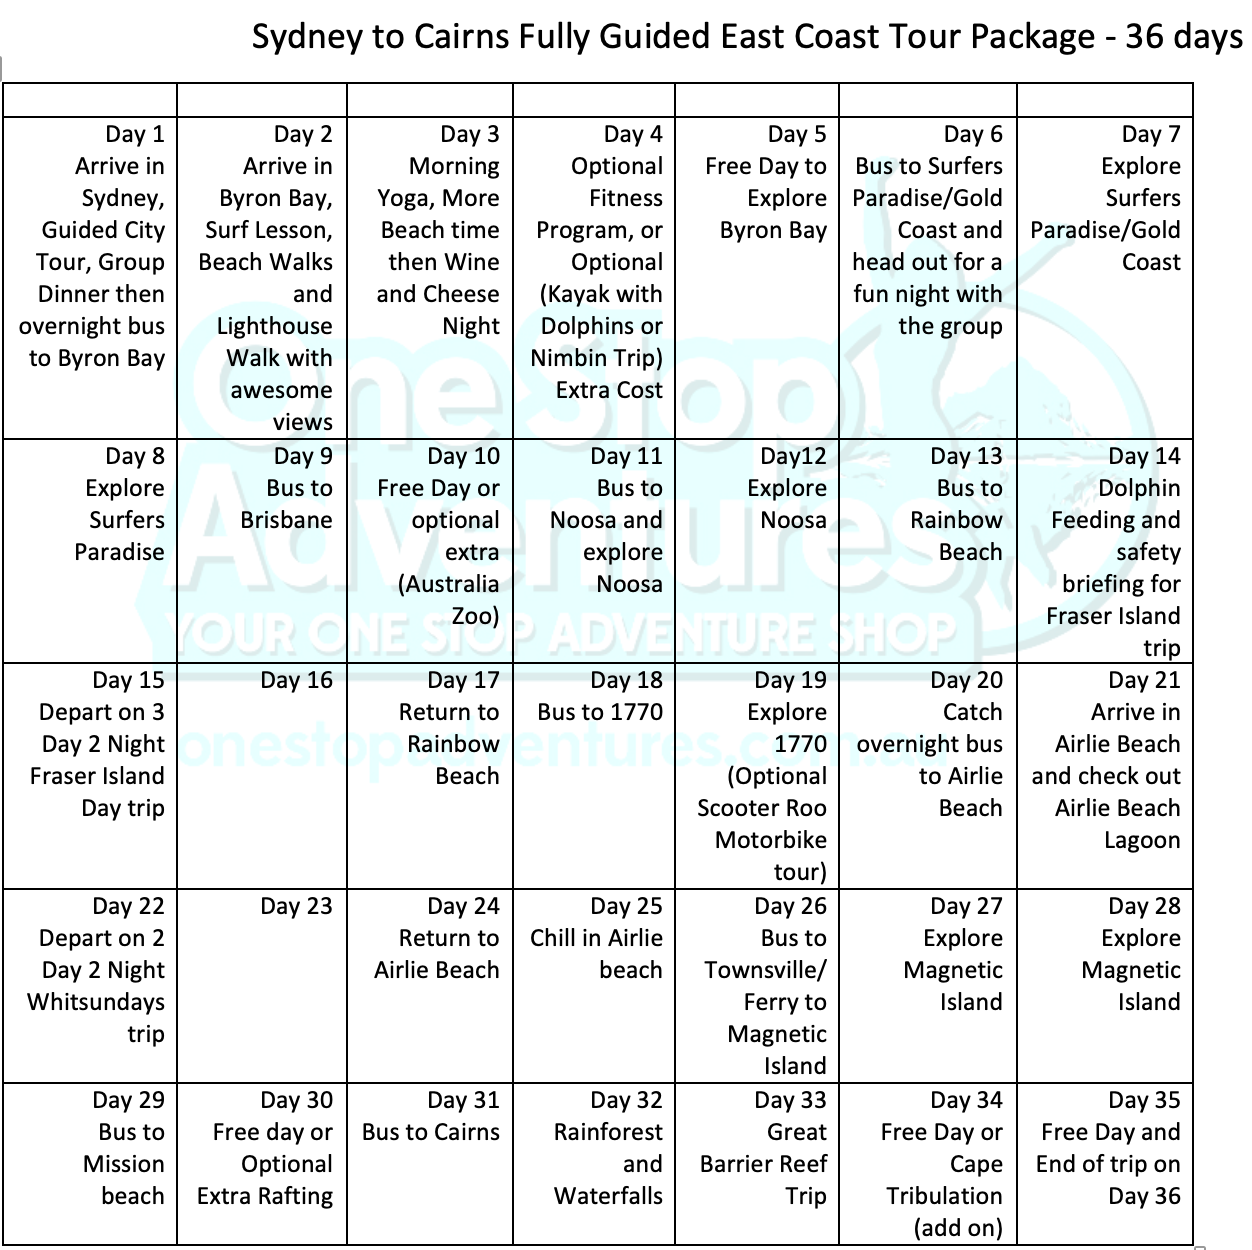 Sydney to Cairns East Coast Itinerary